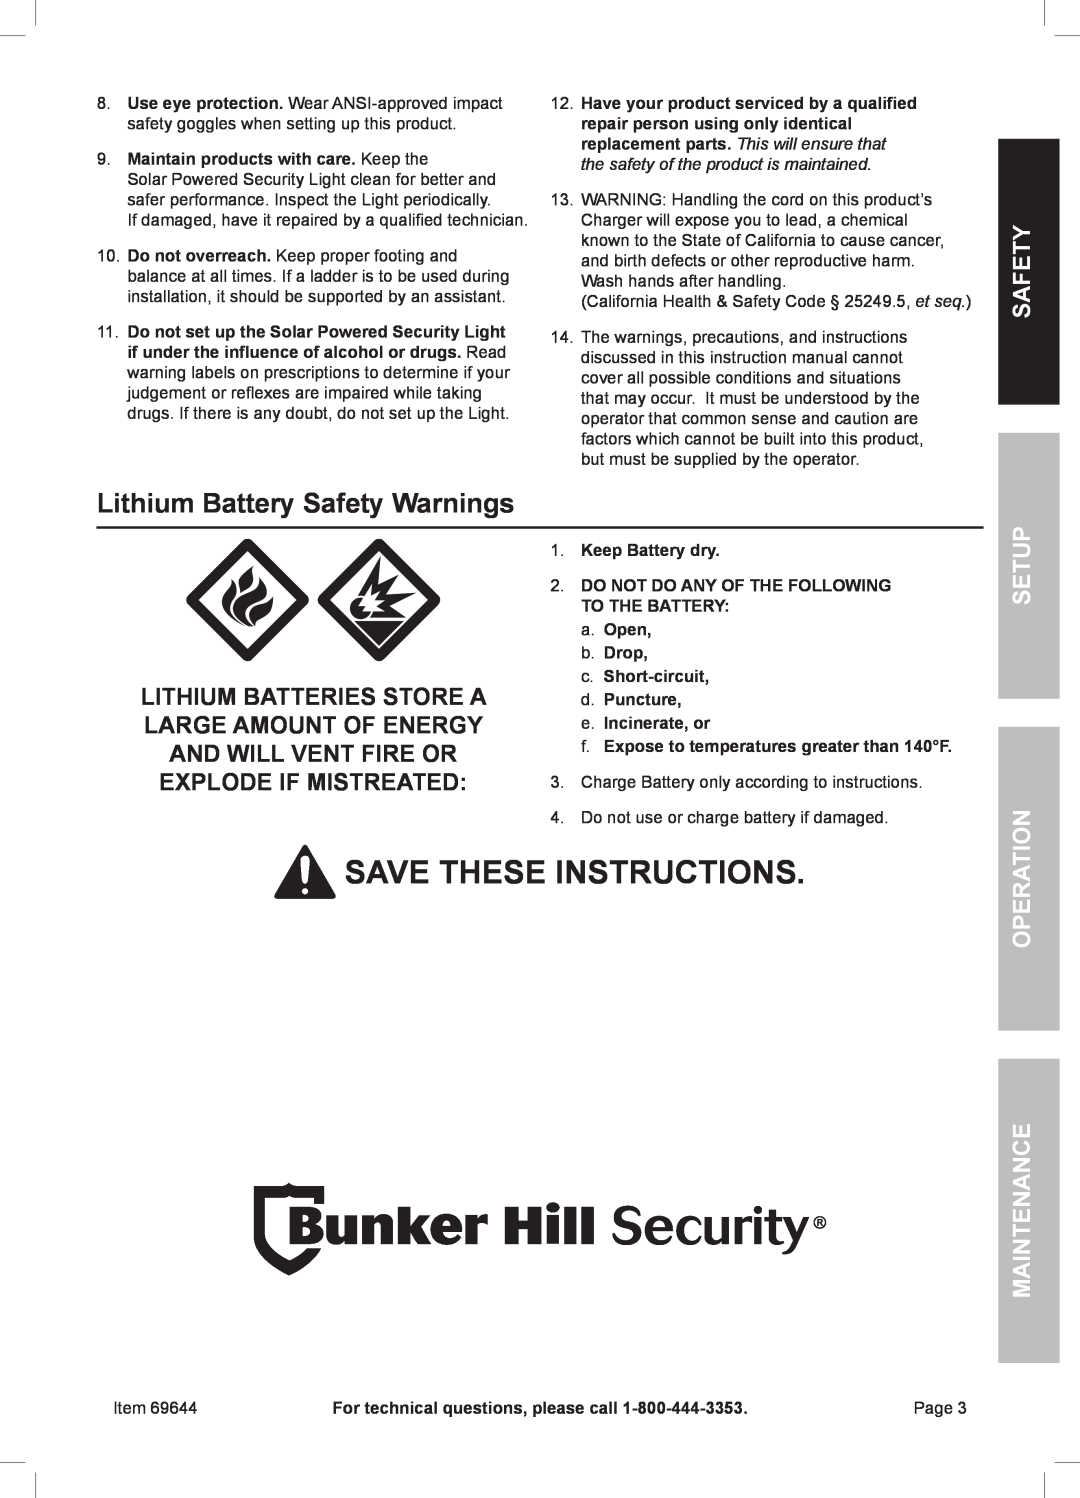 Harbor Freight Tools 36 owner manual Lithium Battery Safety Warnings, Setup, Operation Maintenance, Save these instructions 